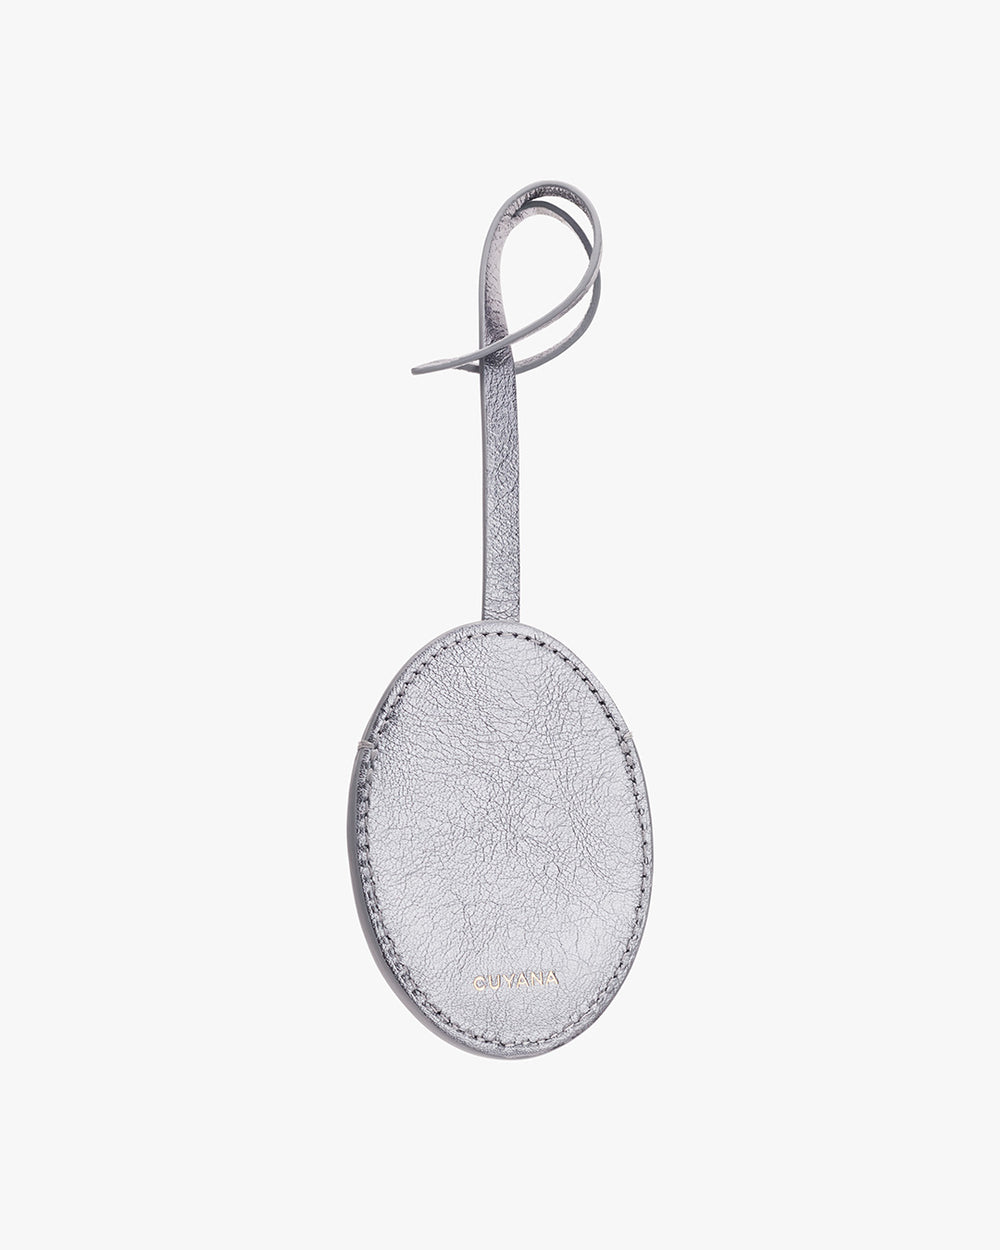 Oval keychain with a loop and pin closure attached at the top.